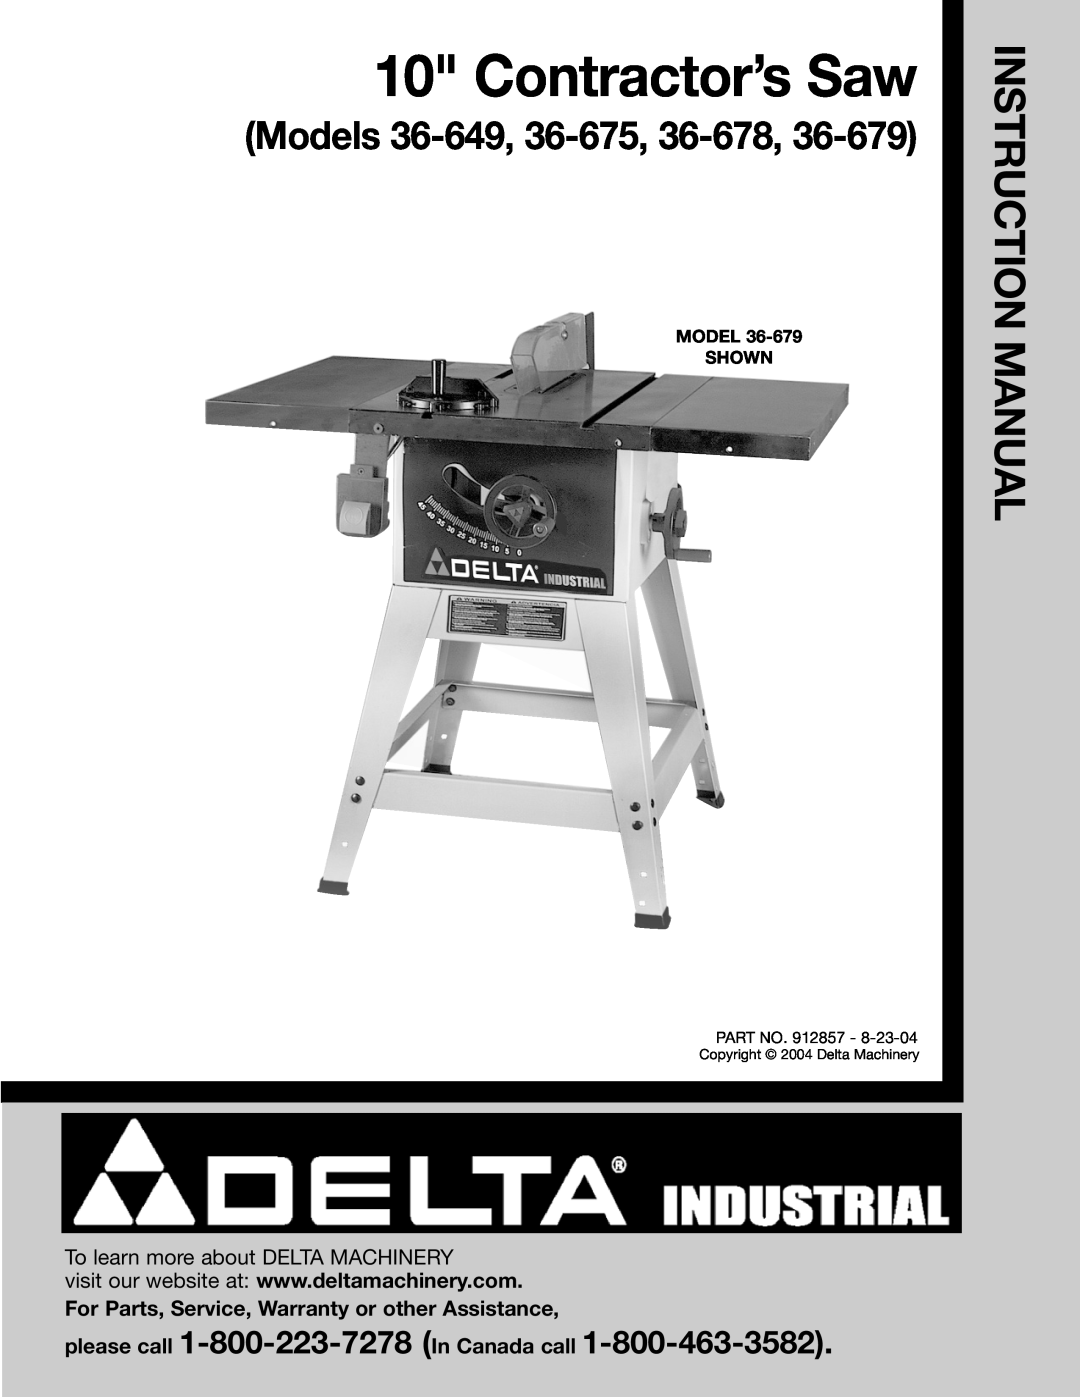 Porter-Cable 36-678 instruction manual please call 1-800-223-7278 In Canada call, To learn more about DELTA MACHINERY 